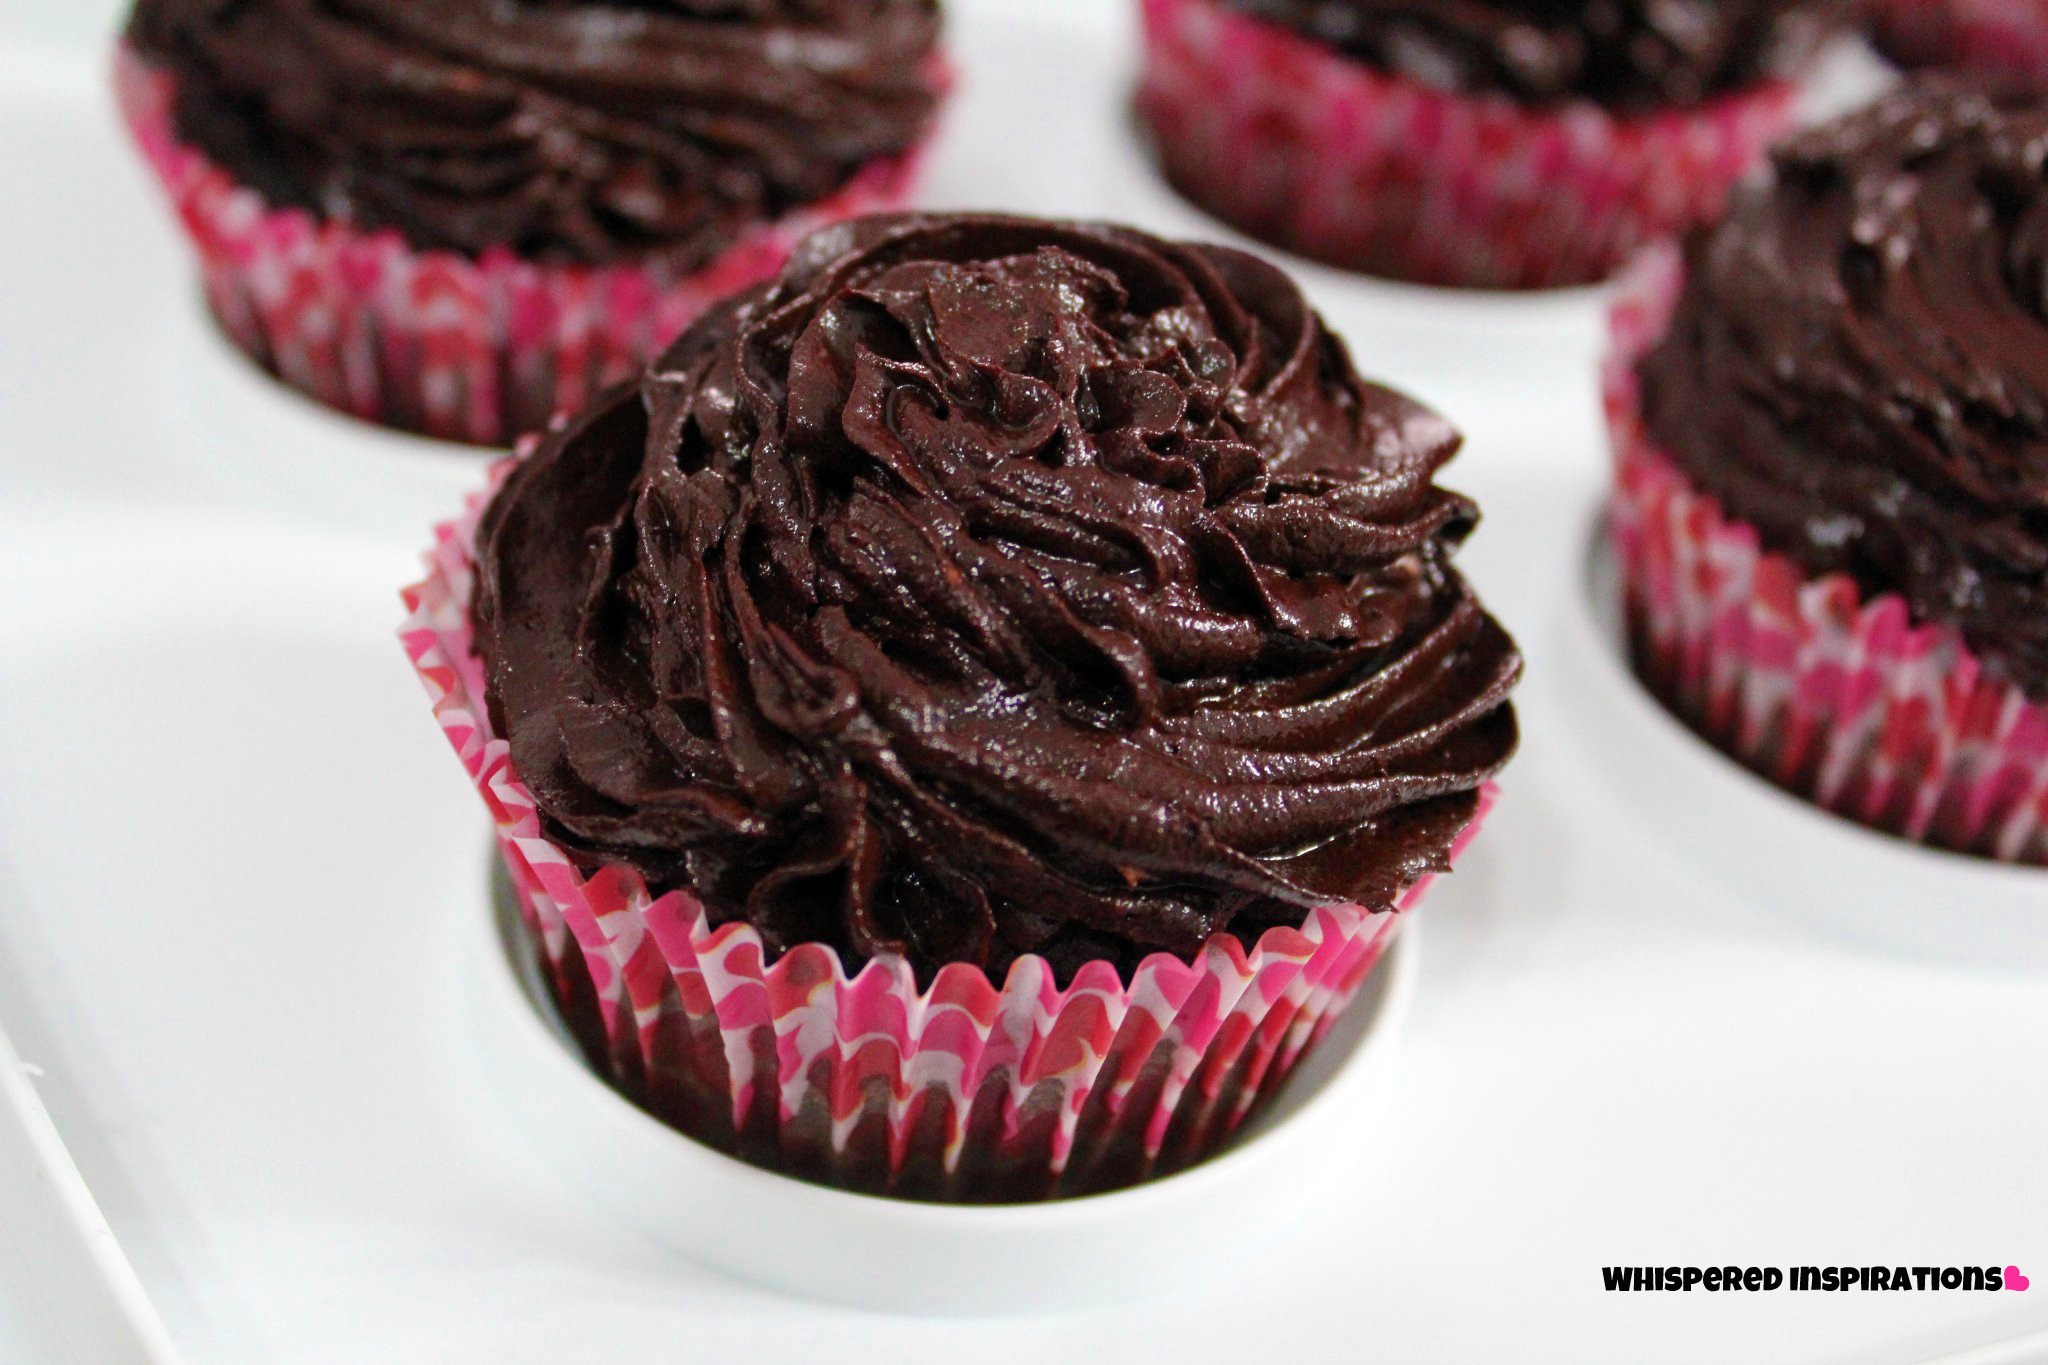 A close-up of an organic and gluten-free chocolate cupcake.